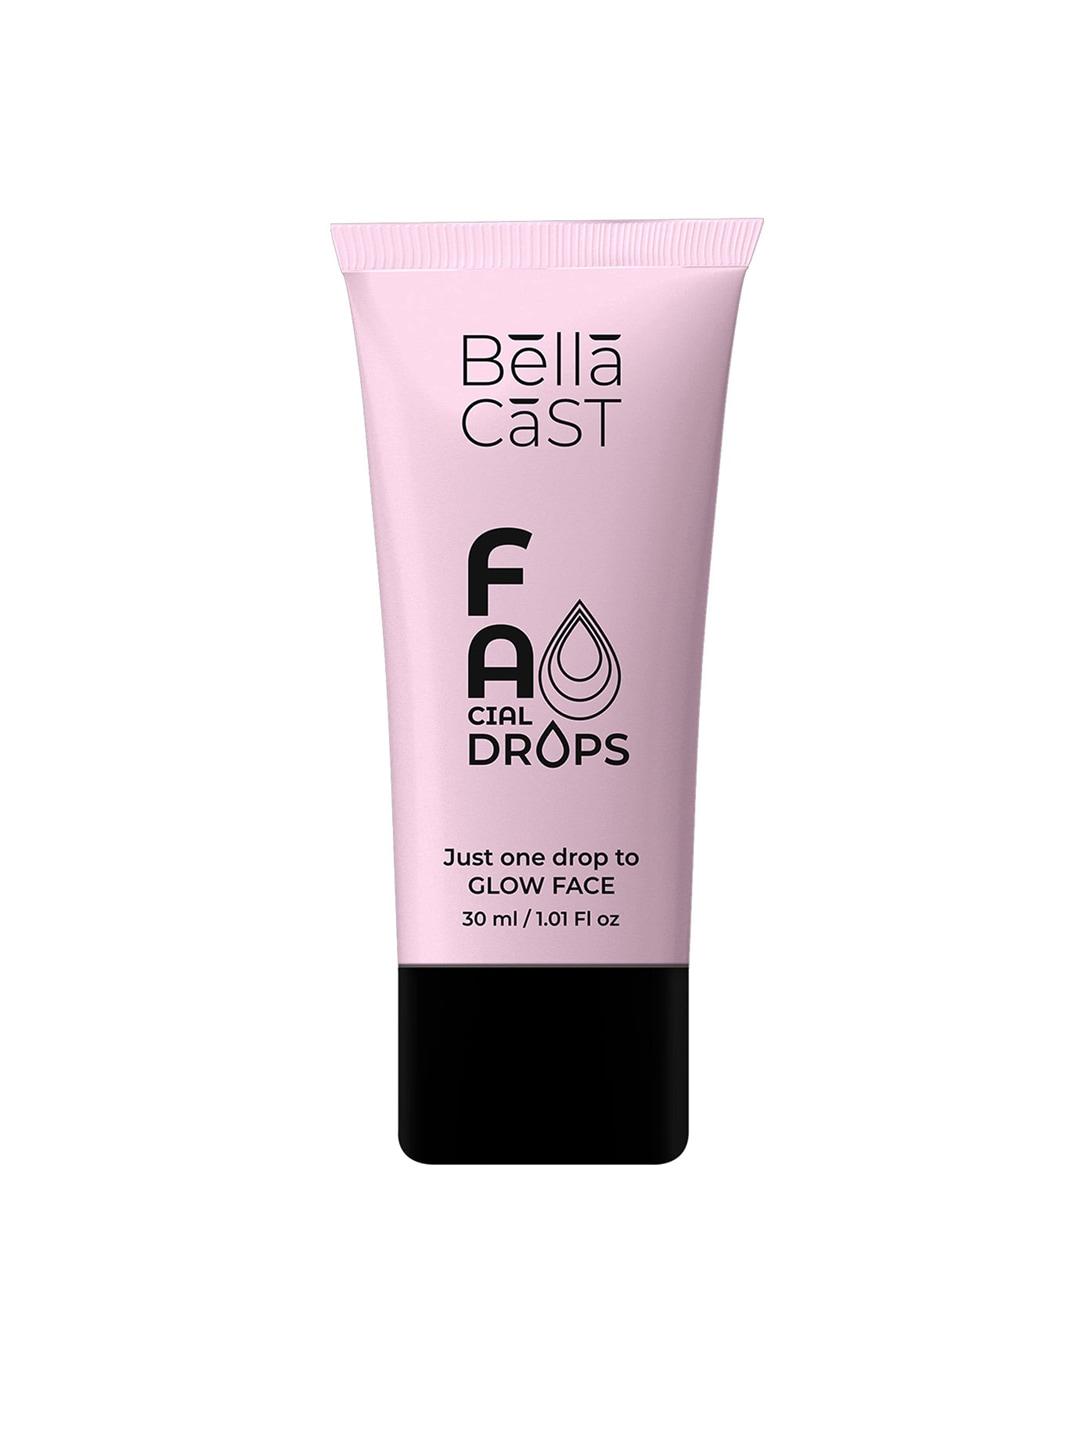 BellaCast Facial Drops Face Wash For Clear & Glowing Skin  - 30ml